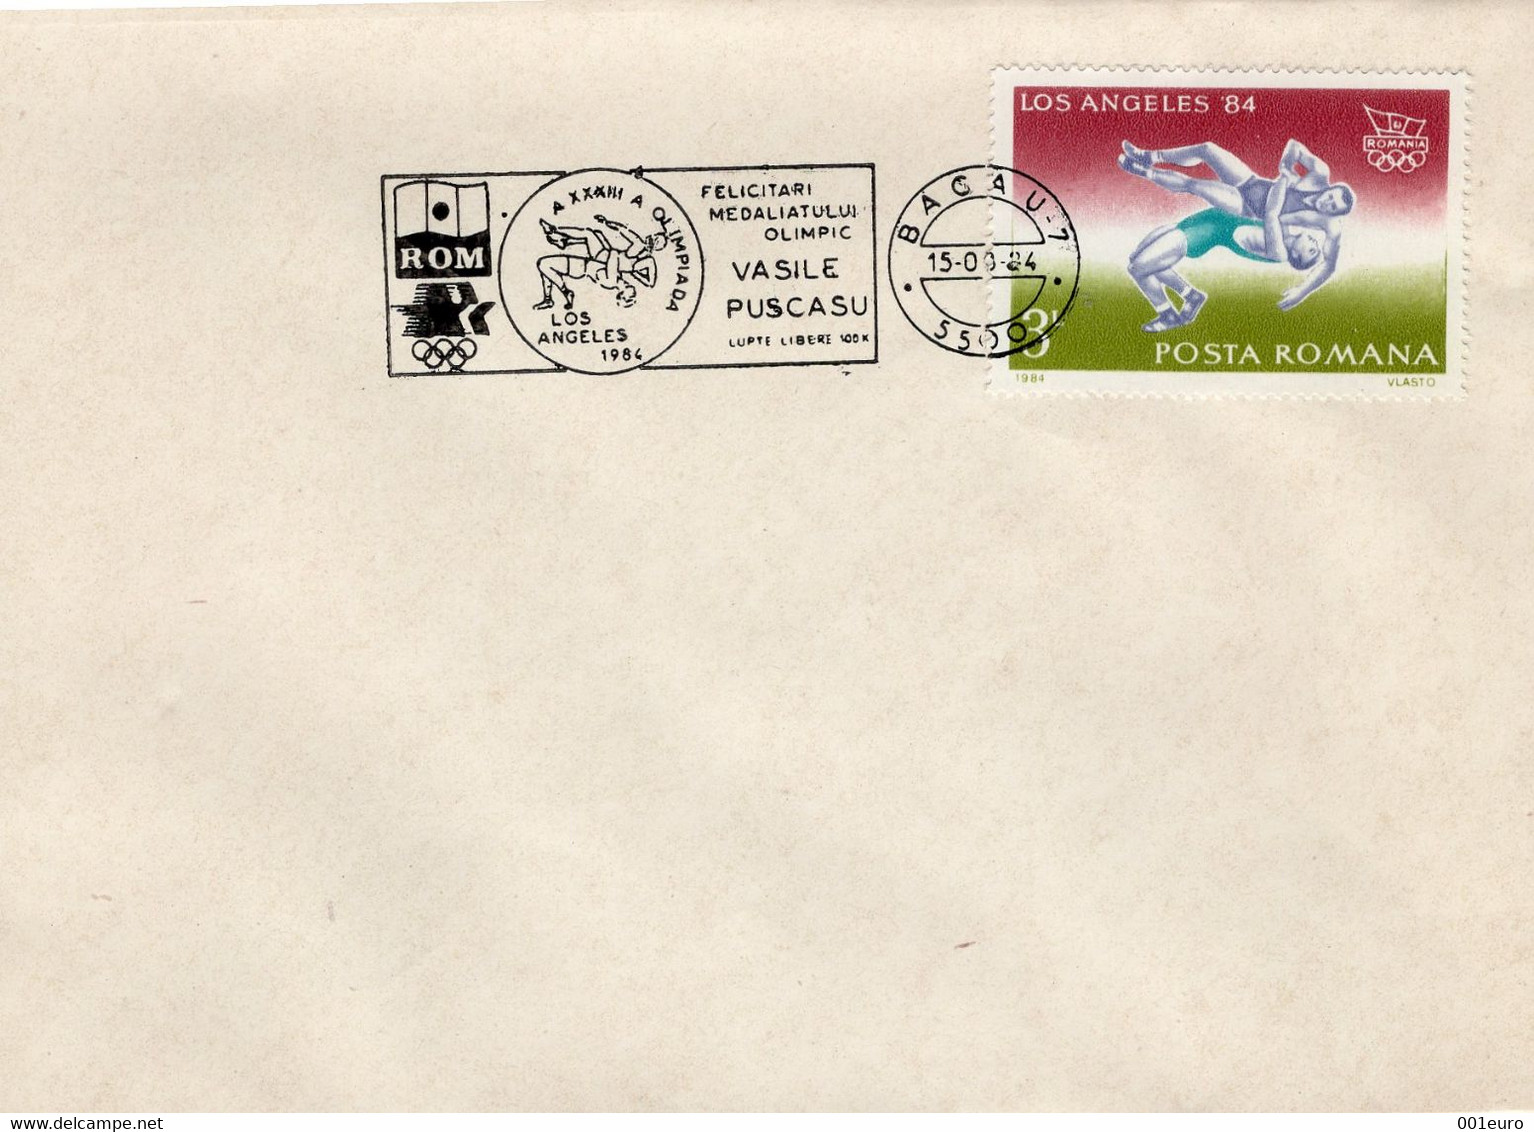 ROMANIA 1984: LOS ANGELES OLYMPIC MEDAL - WRESTLING, Illustrated Postmark On Cover  - Registered Shipping! - Marcofilia